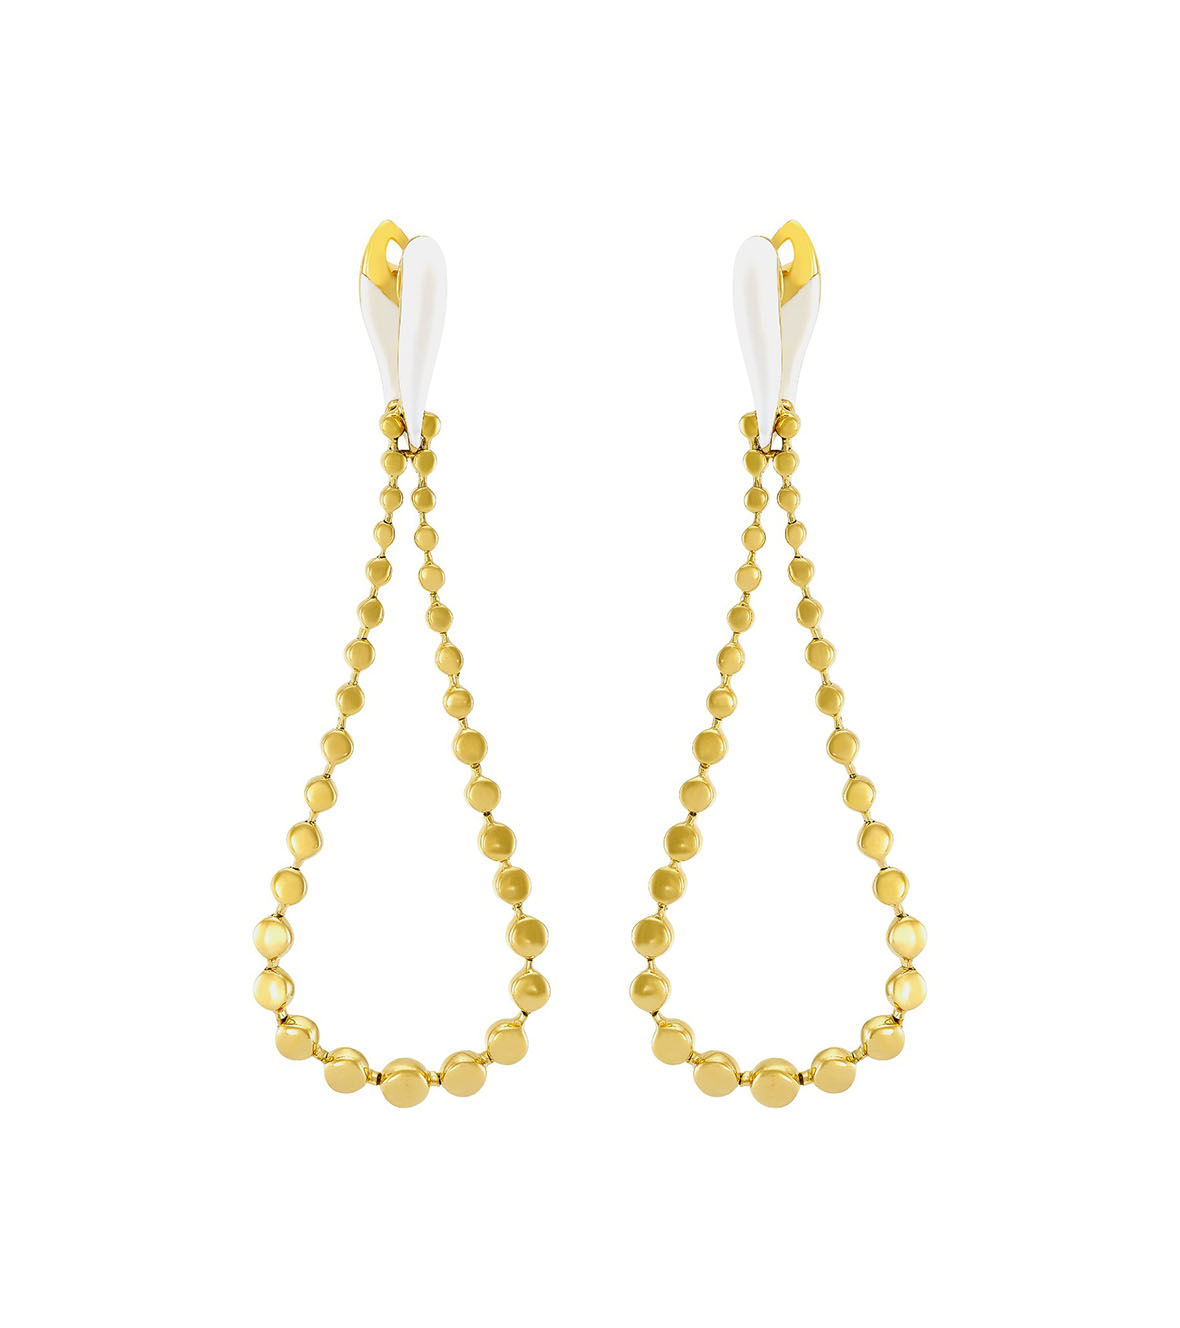 Yellow Gold Earrings with White Enamel 03623 by Etho Maria